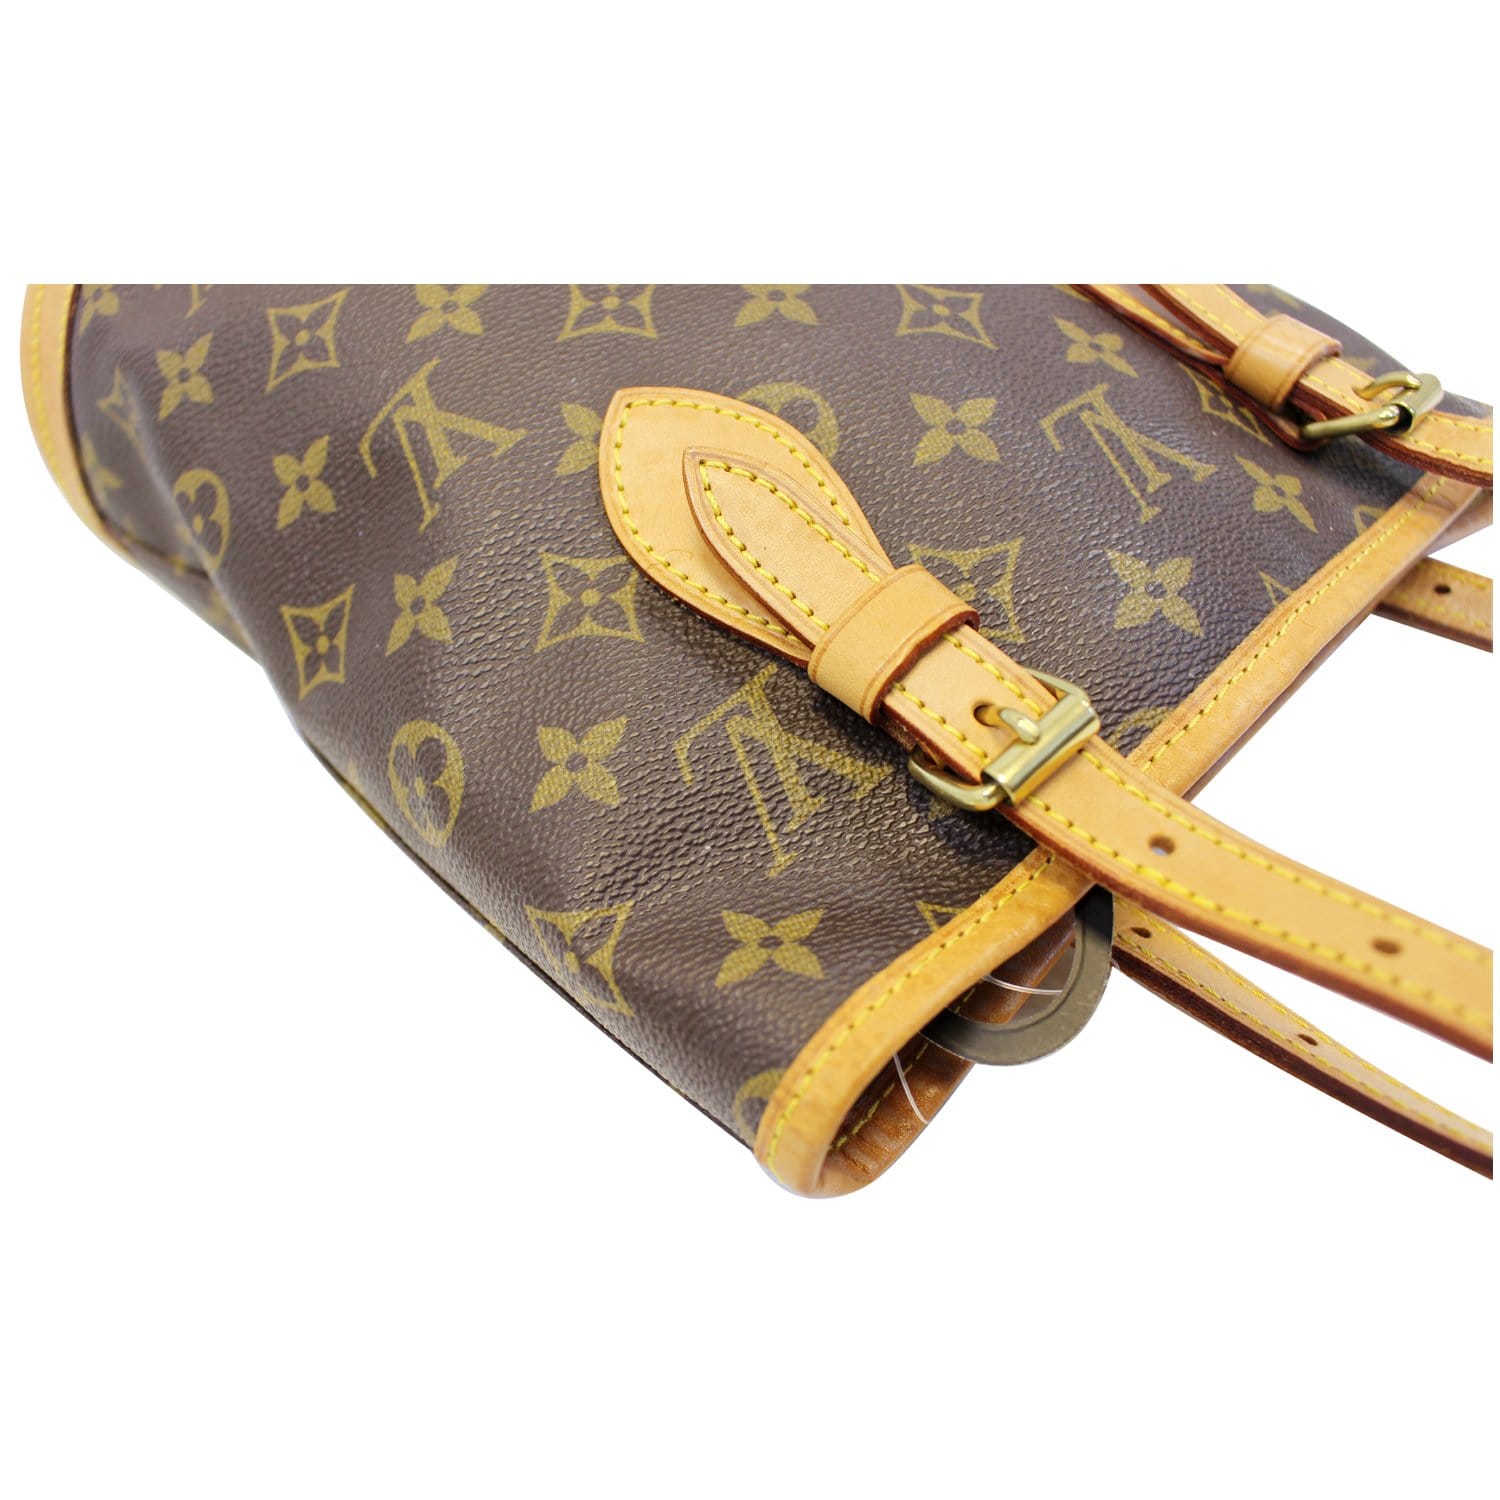 100% authenticity Guaranteed - Louis Vuitton Bucket PM Pm/Small / Brown